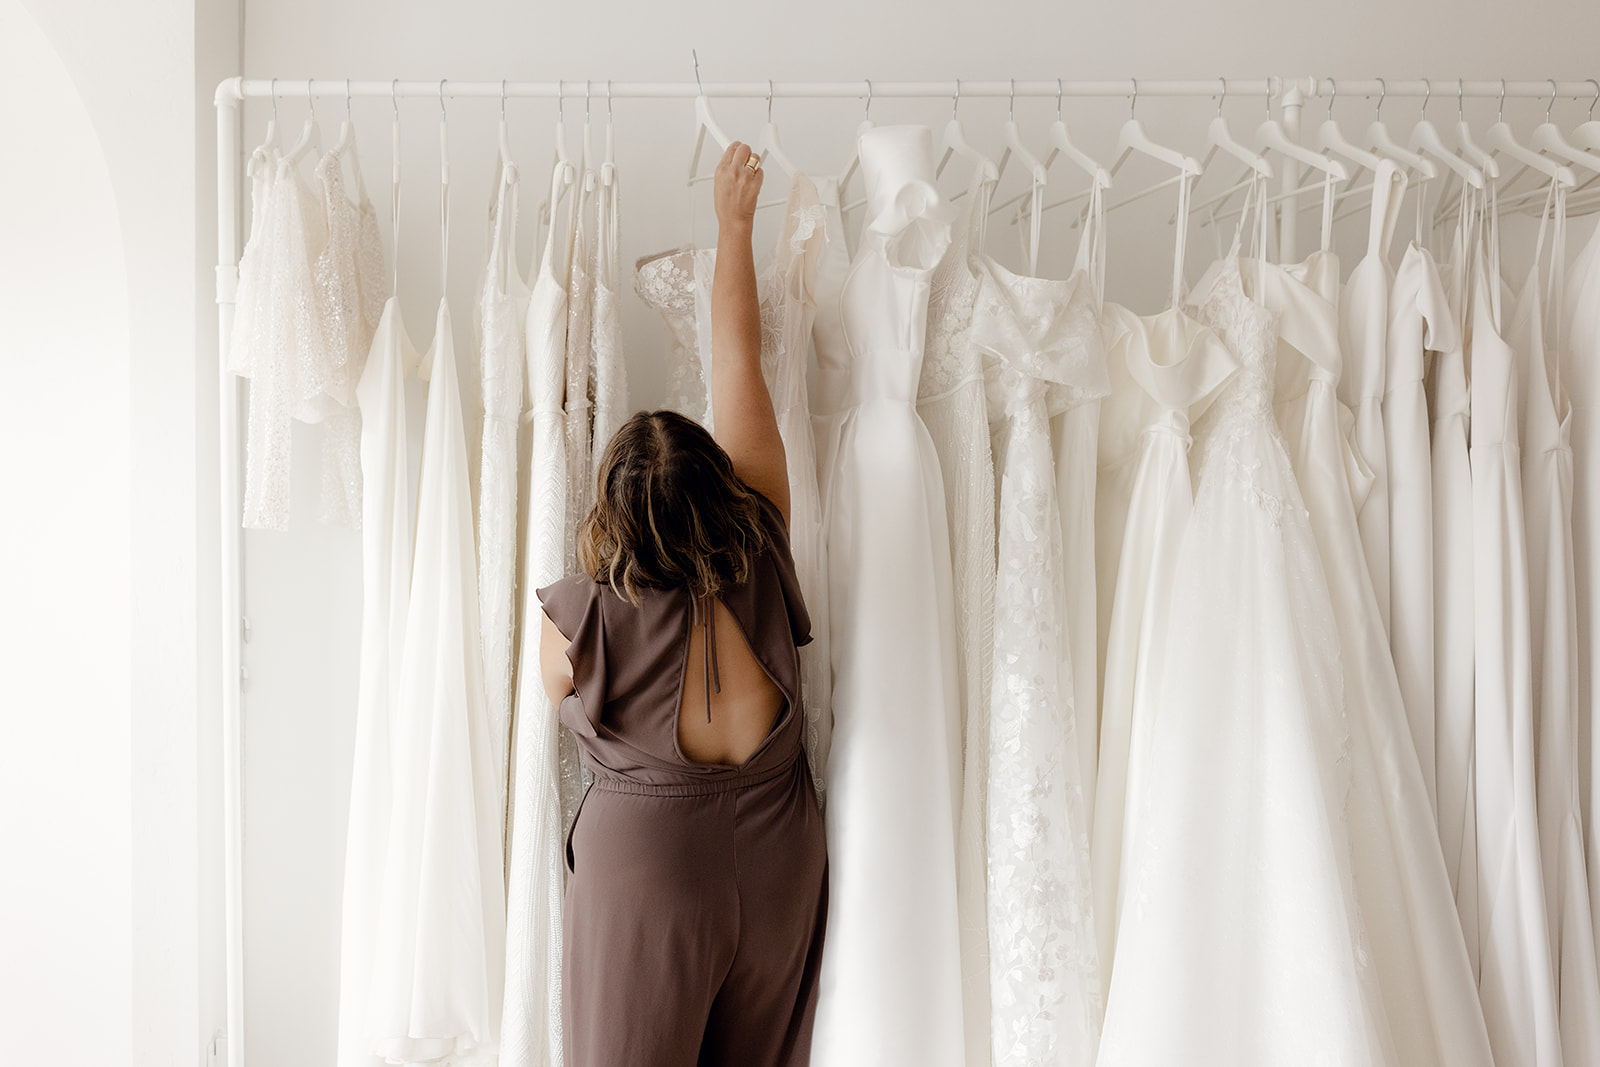 REVELLE Bridal Boutique Ottawa Wedding Dress Rack Pulling Gowns for Clients